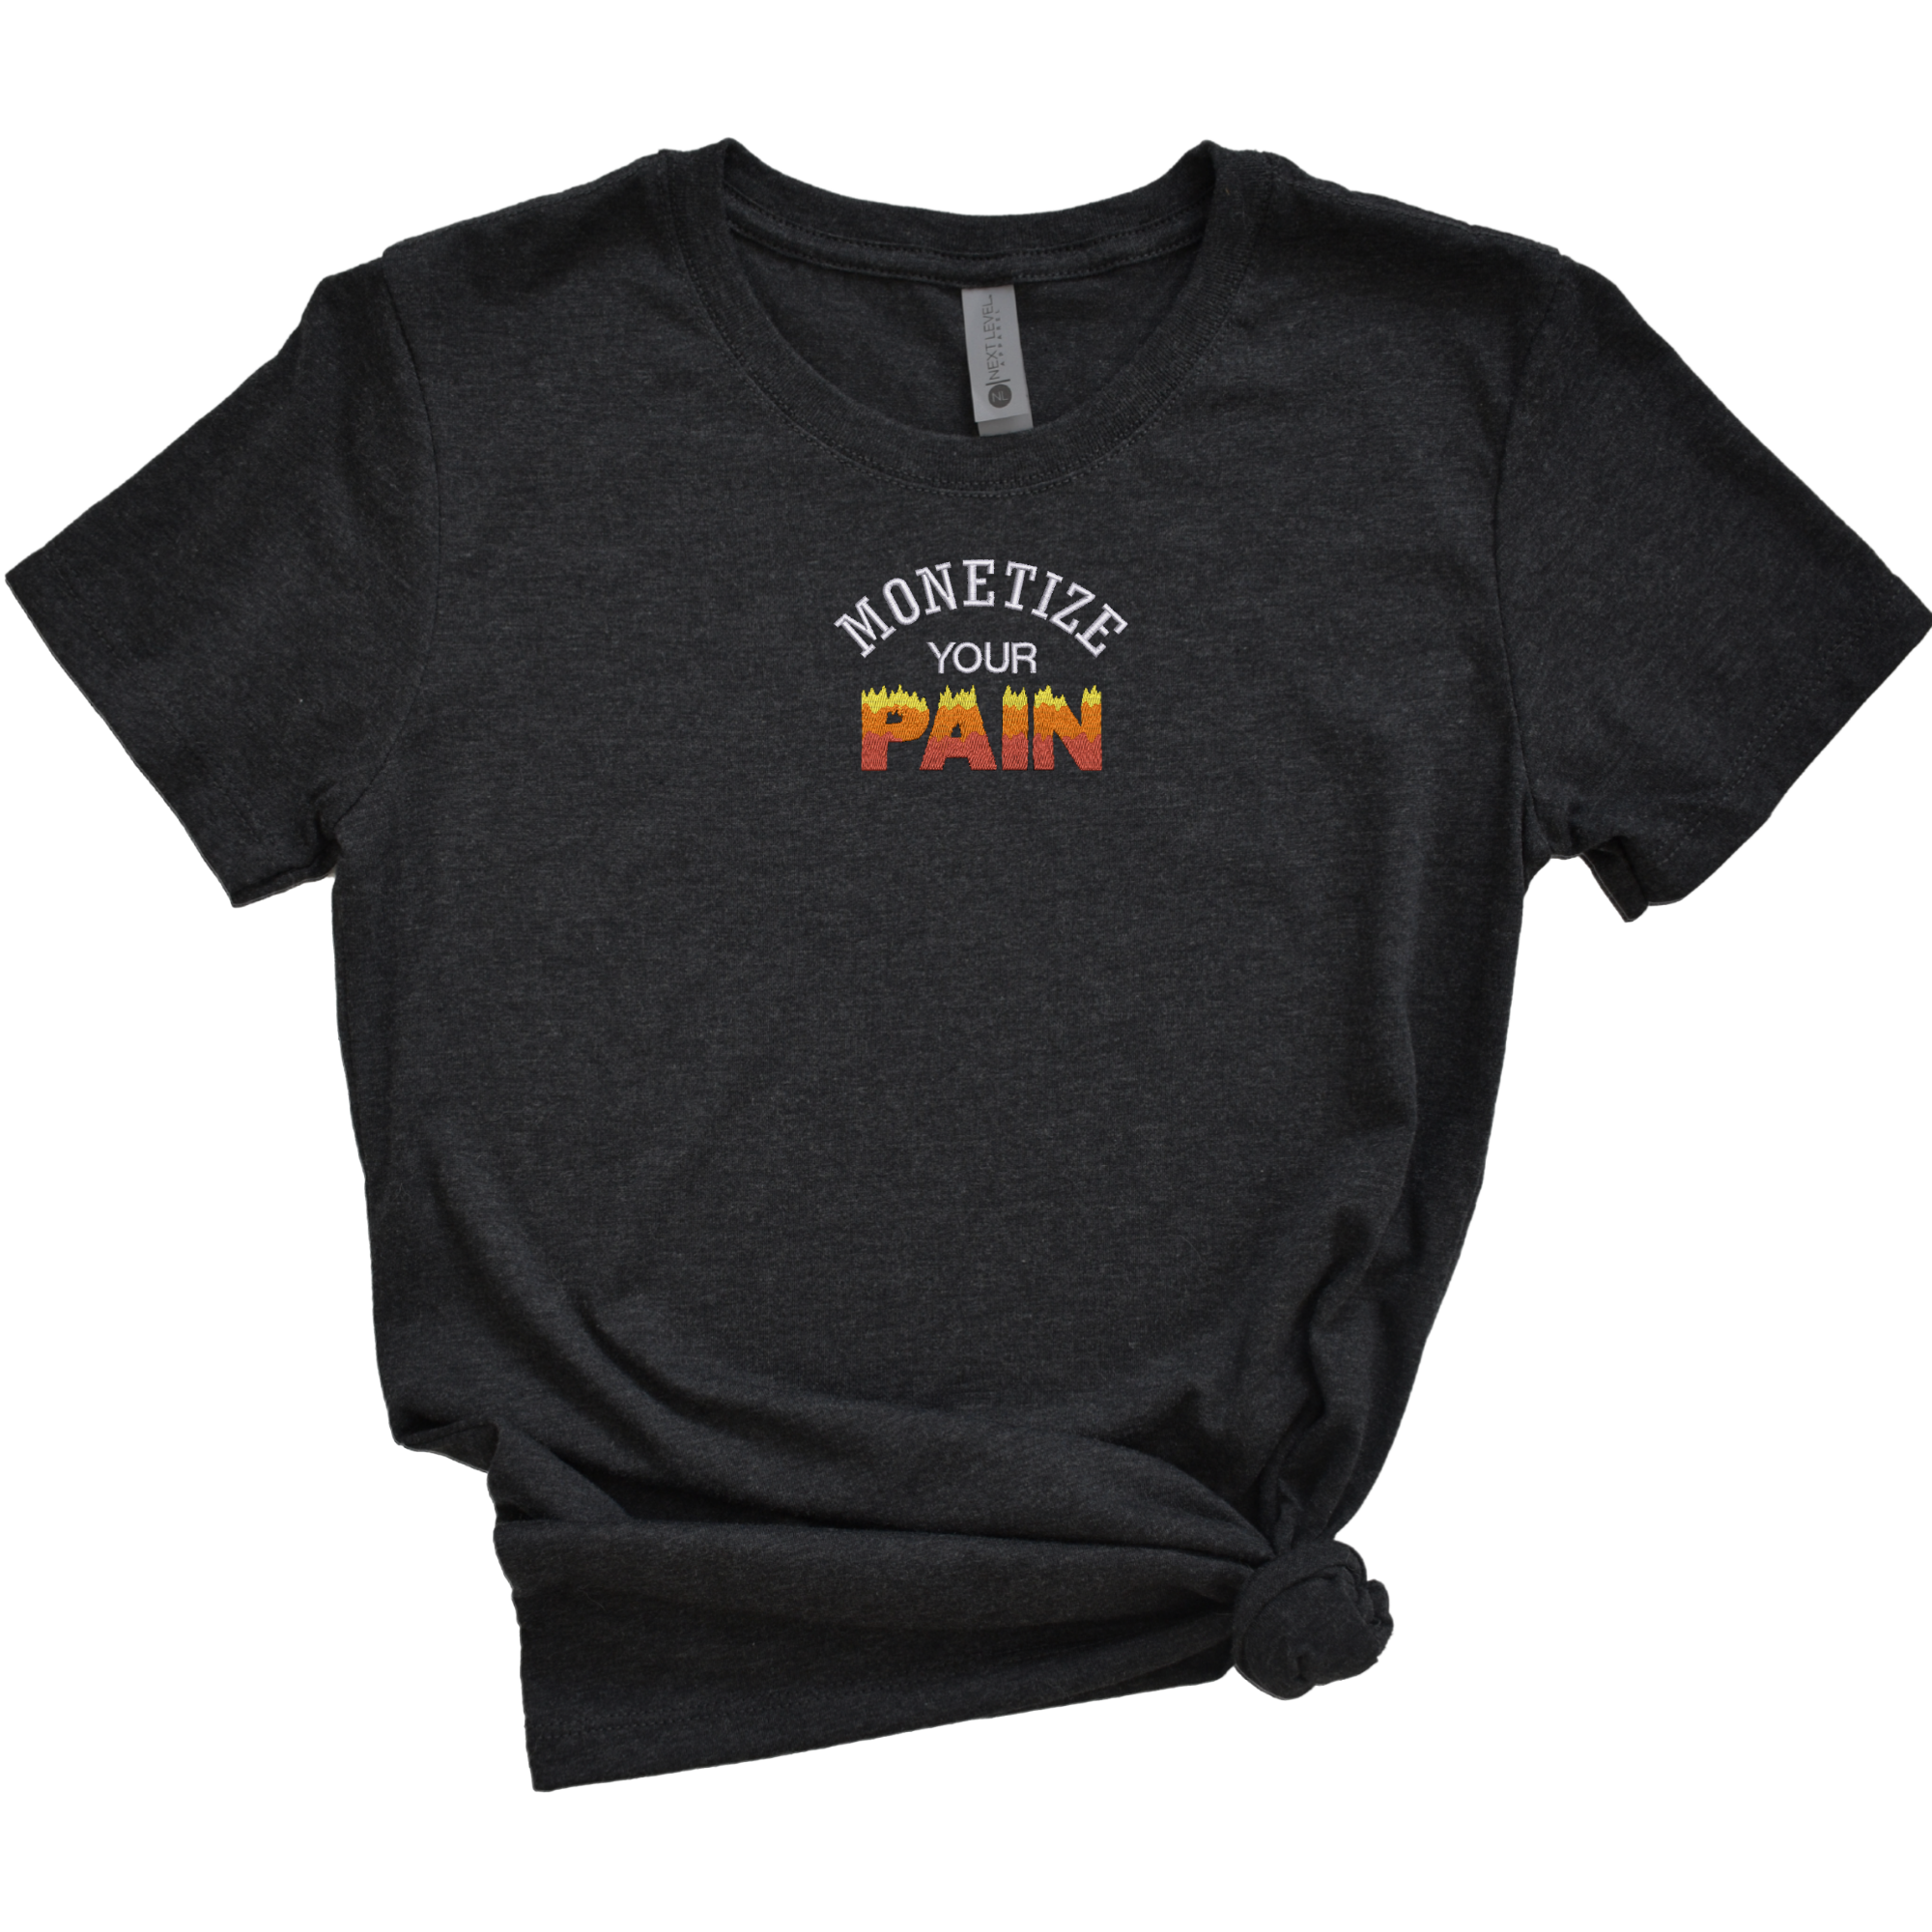 Monetize Your Pain Embroidered Tee Shirt, Unisex